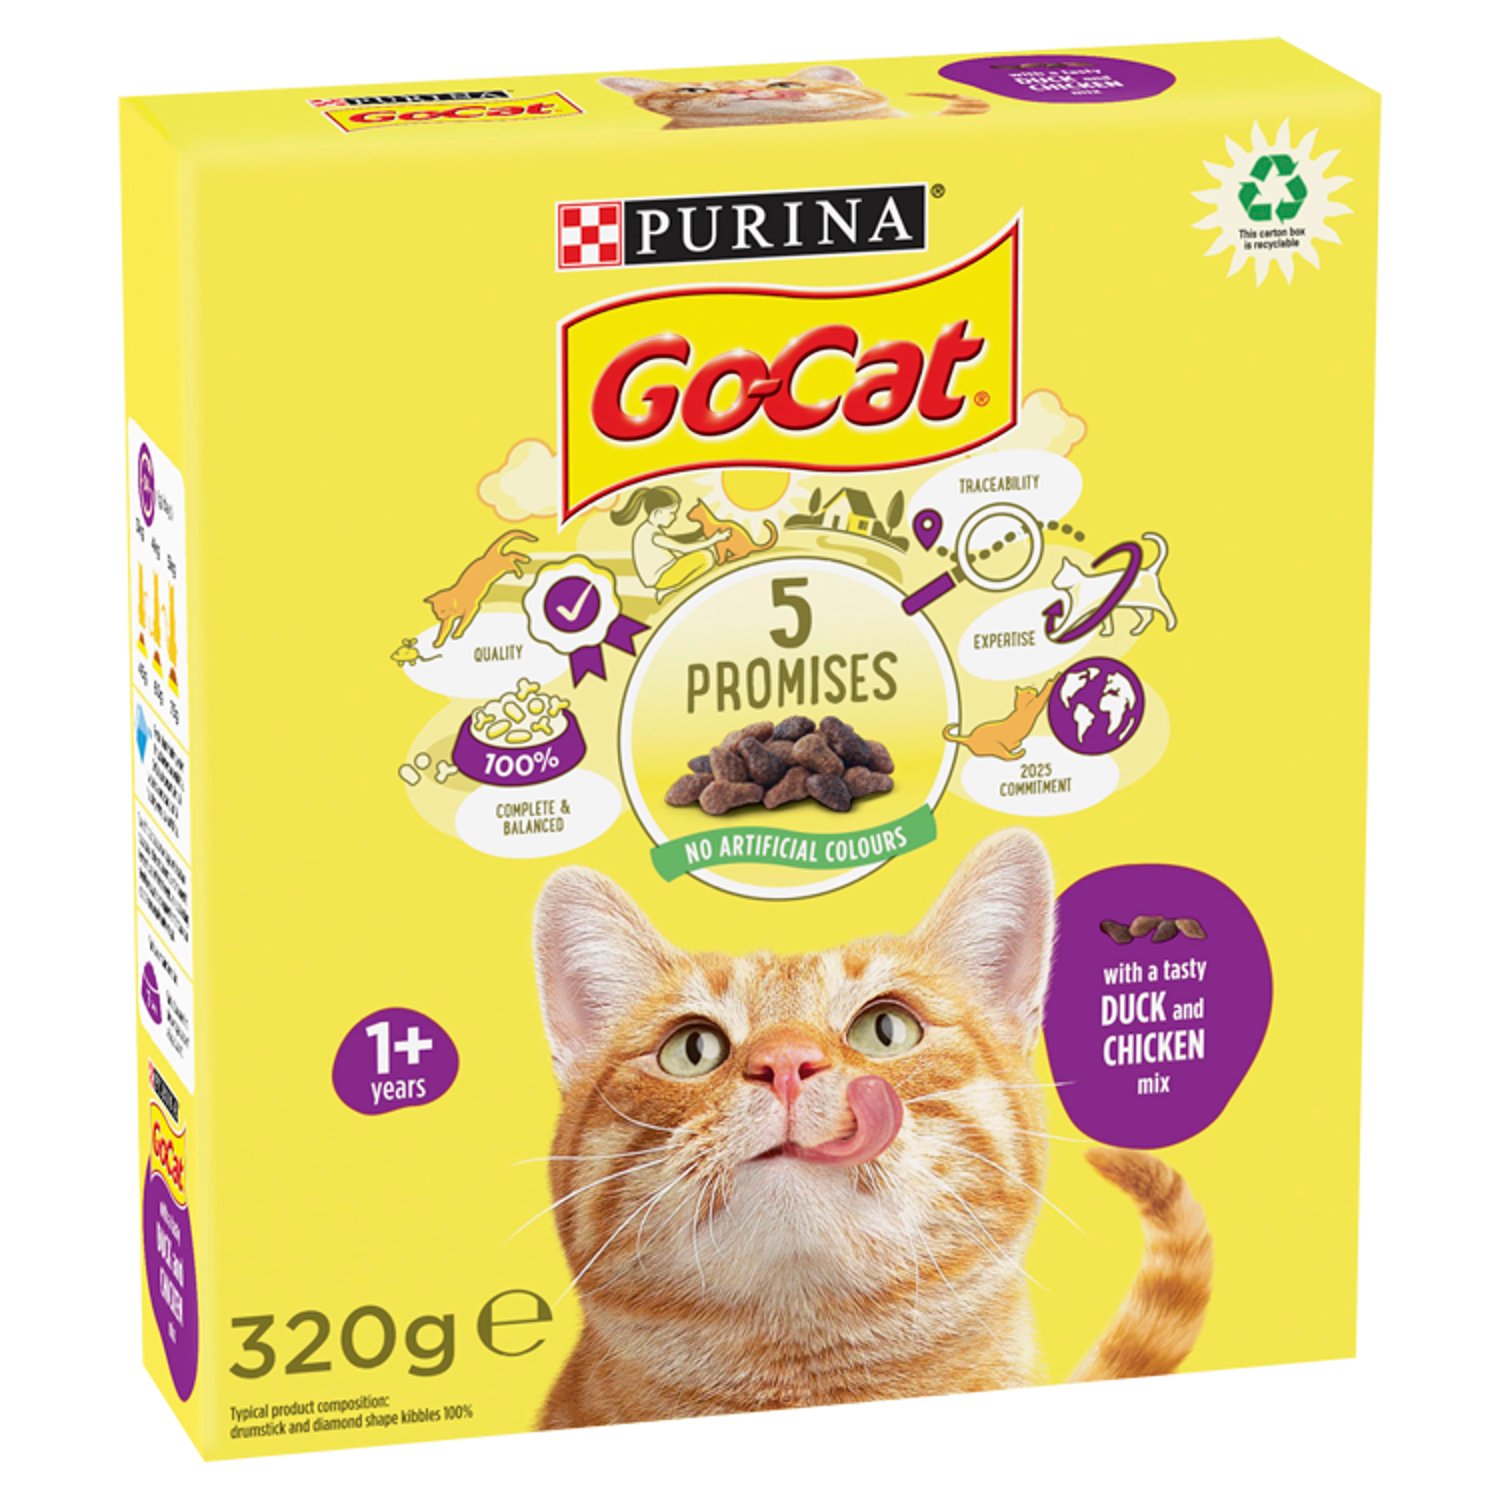 Go-Cat® 5 Promises. From the day you brought your cat home, you promised to care for him and feed him right everyday and help him to live a happy and healthy life. Go-Cat® is here to help you to fullfill your promise. With use of our experience and expertise, we do our utmost for you and for your cat to keep him happy and healthy.

5 promises because we care:
- Nutrition: 100% complete and balanced tasty nutrition for every day with quality protein for the cats' health and happiness
- Quality: over 1000 daily ingredient and production quality checkups
- Purina experts: developed by Purina nutritionists
- Trusted Suppliers: made with high quality ingredients carefully-selected from known and trusted suppliers
- Year 2025 commitment: our commitment is to have 100% of our packaging recyclable or reusable by year 2025

All our recipes have no artificial colourants, flavourings or preservatives